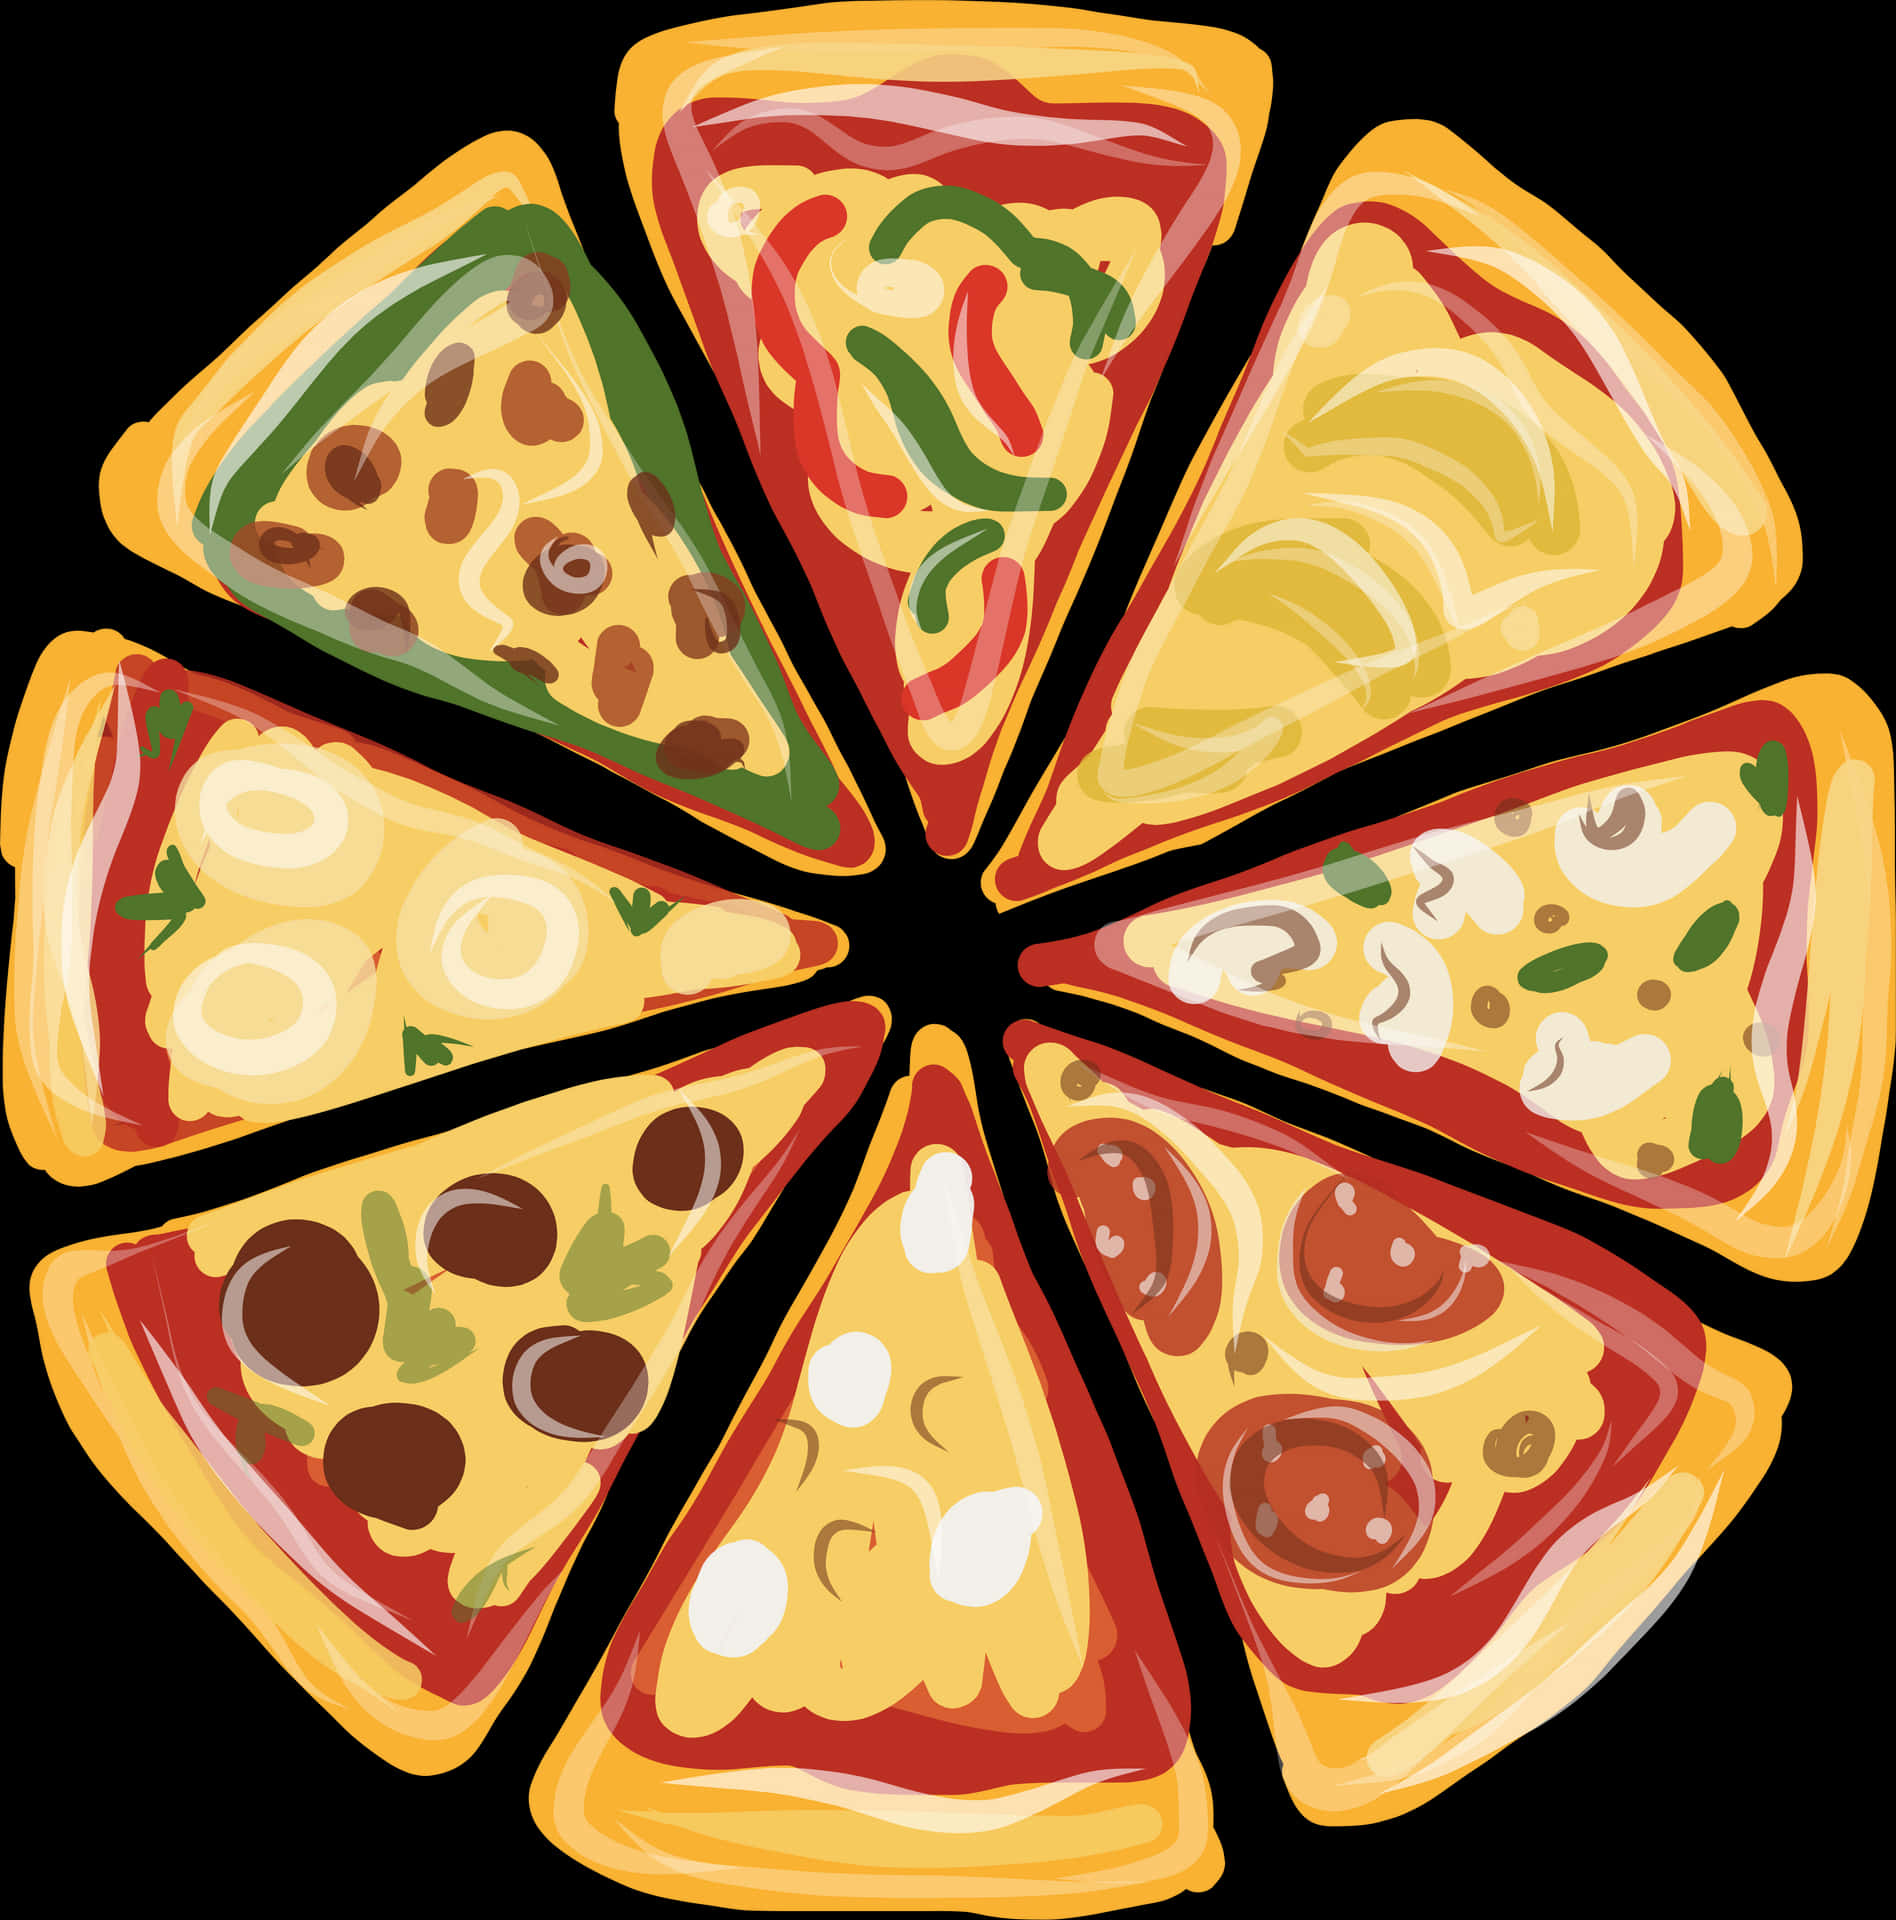 Assorted Pizza Slices Circle Illustration PNG